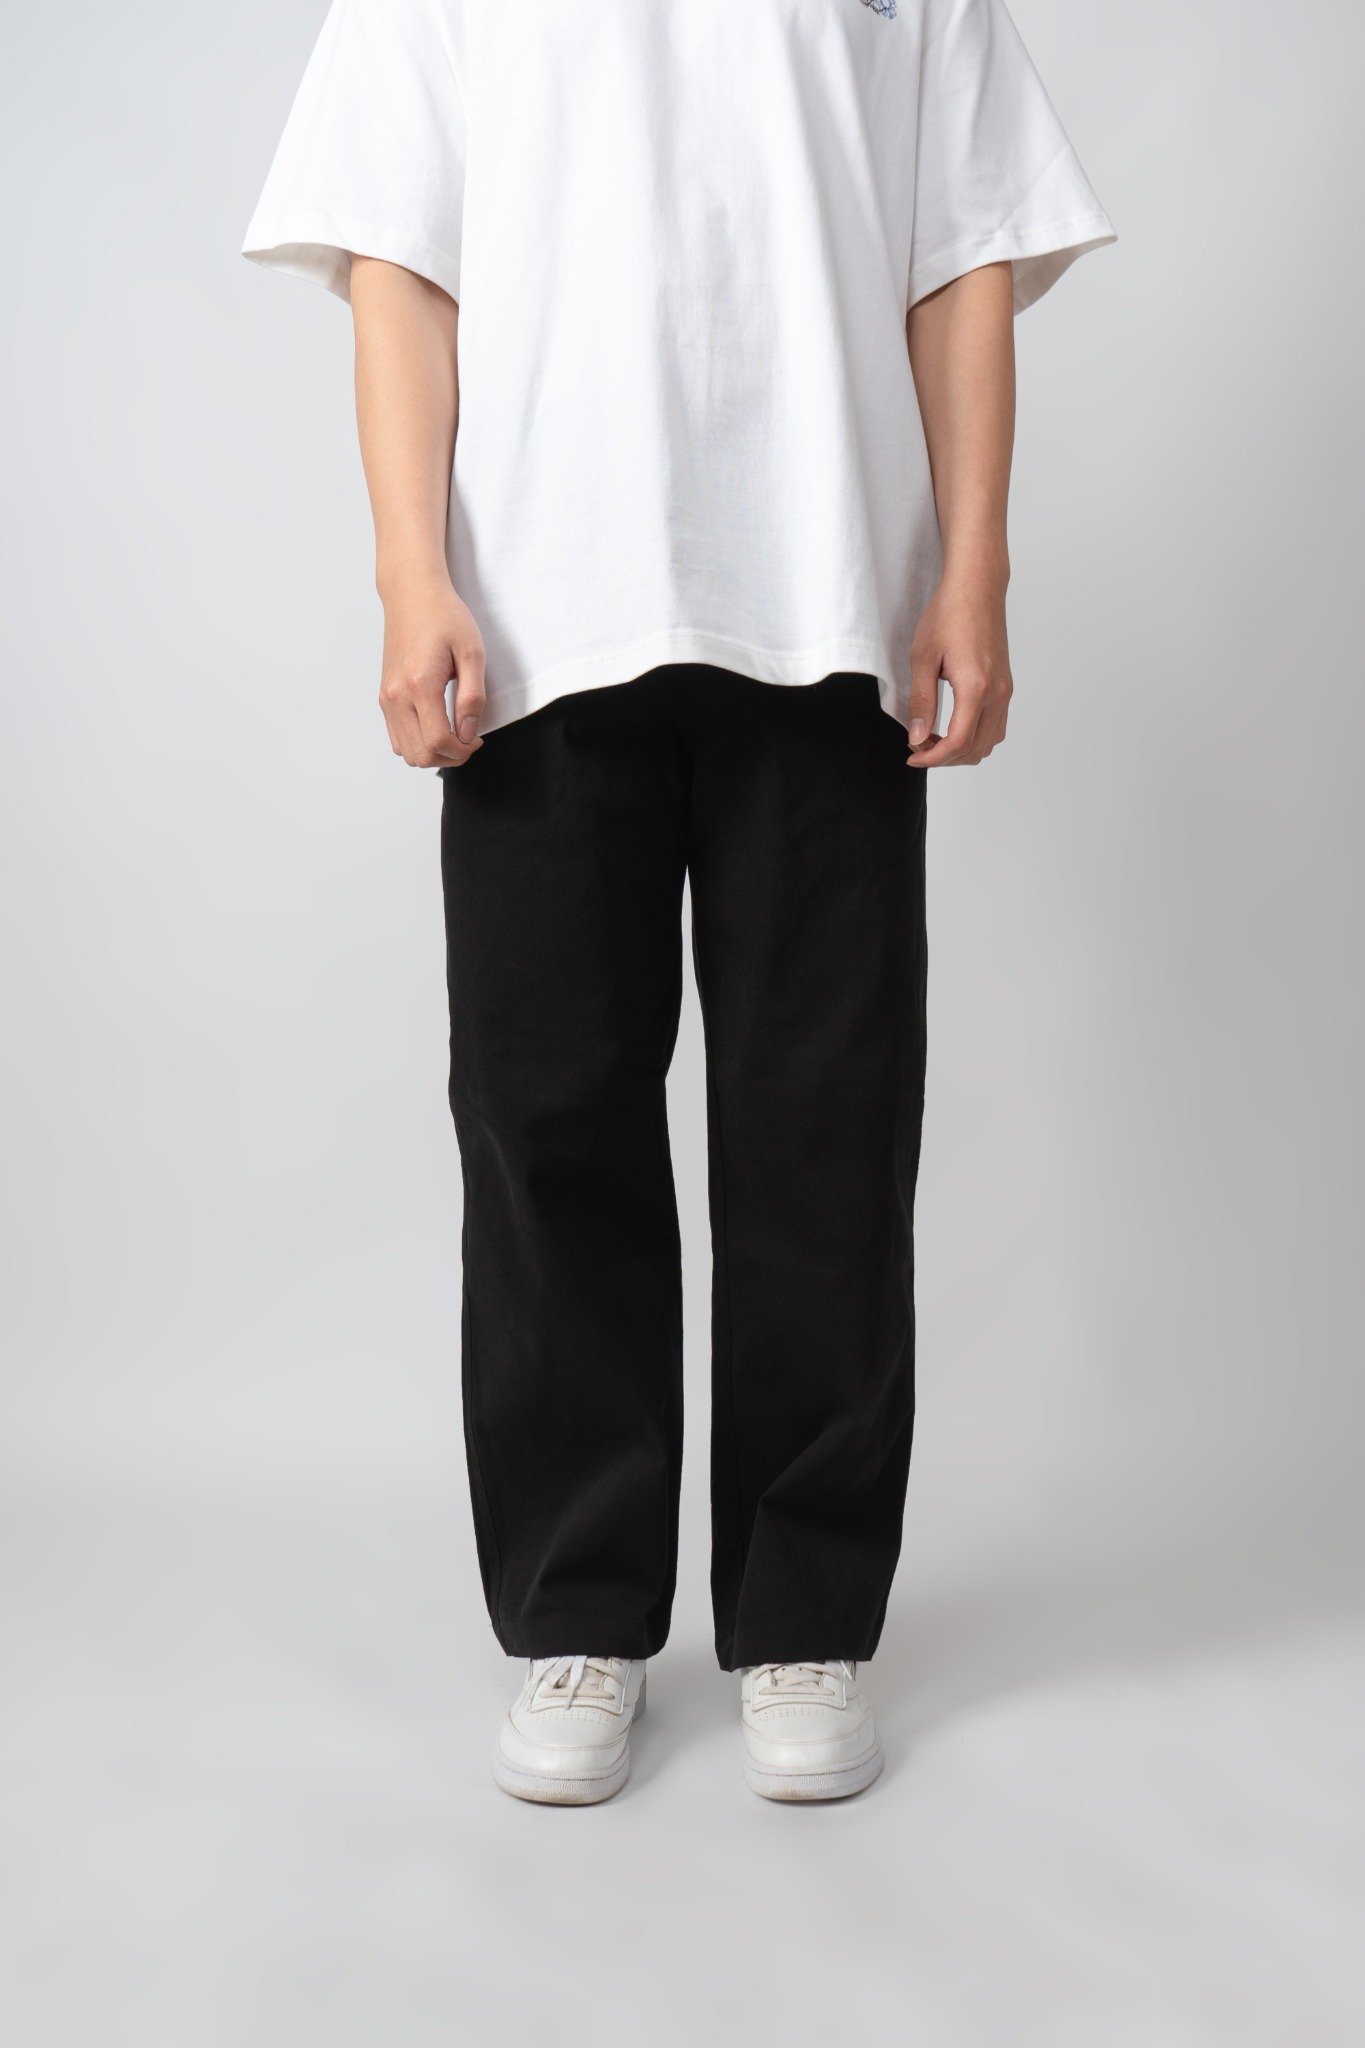  BLACK RELAXED FIT CHINO PANTS 